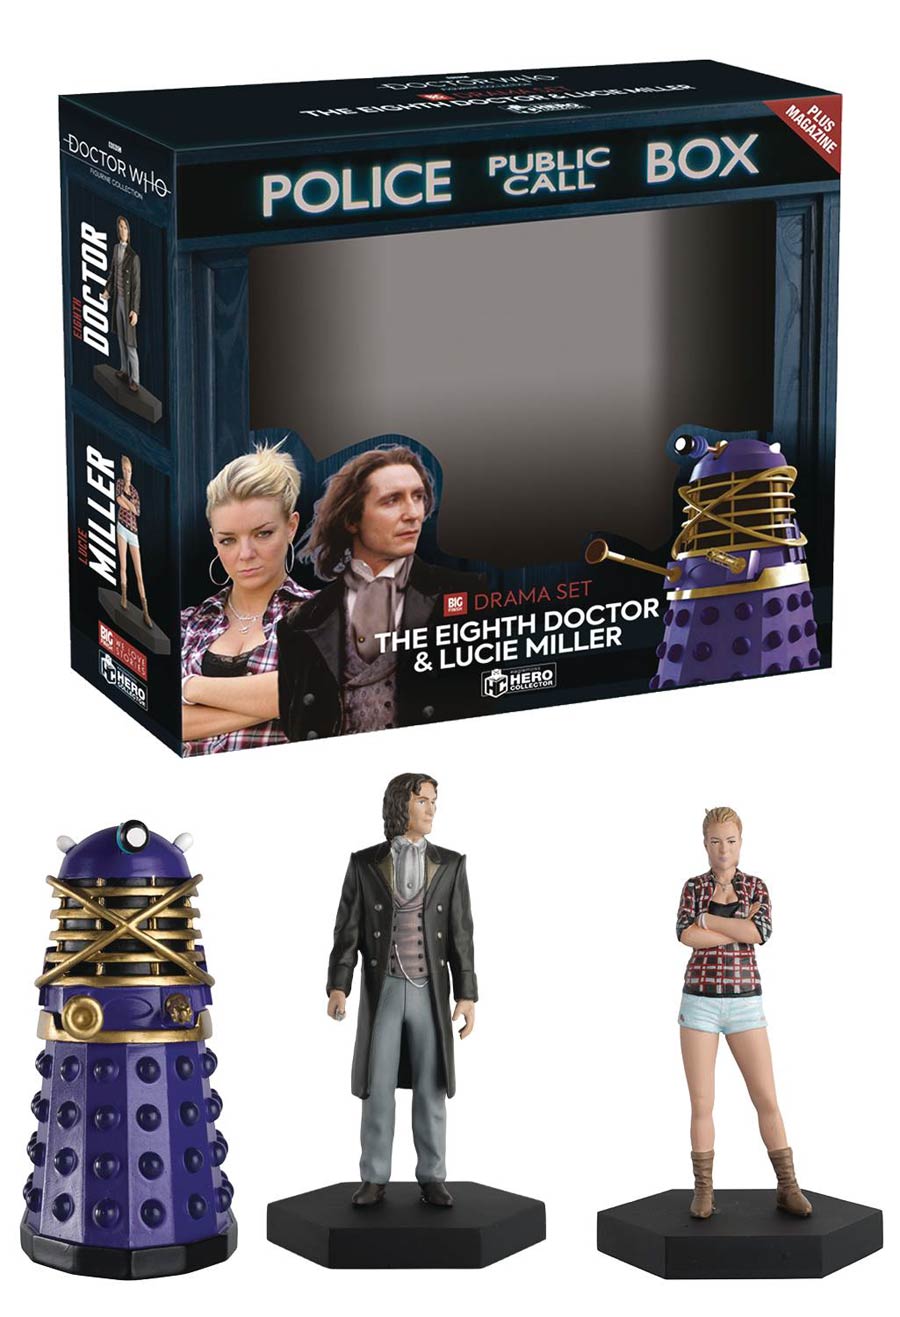 Doctor Who Figurine Collection Companion Set #9 8th Doctor Lucie Miller Time Controller Dalek